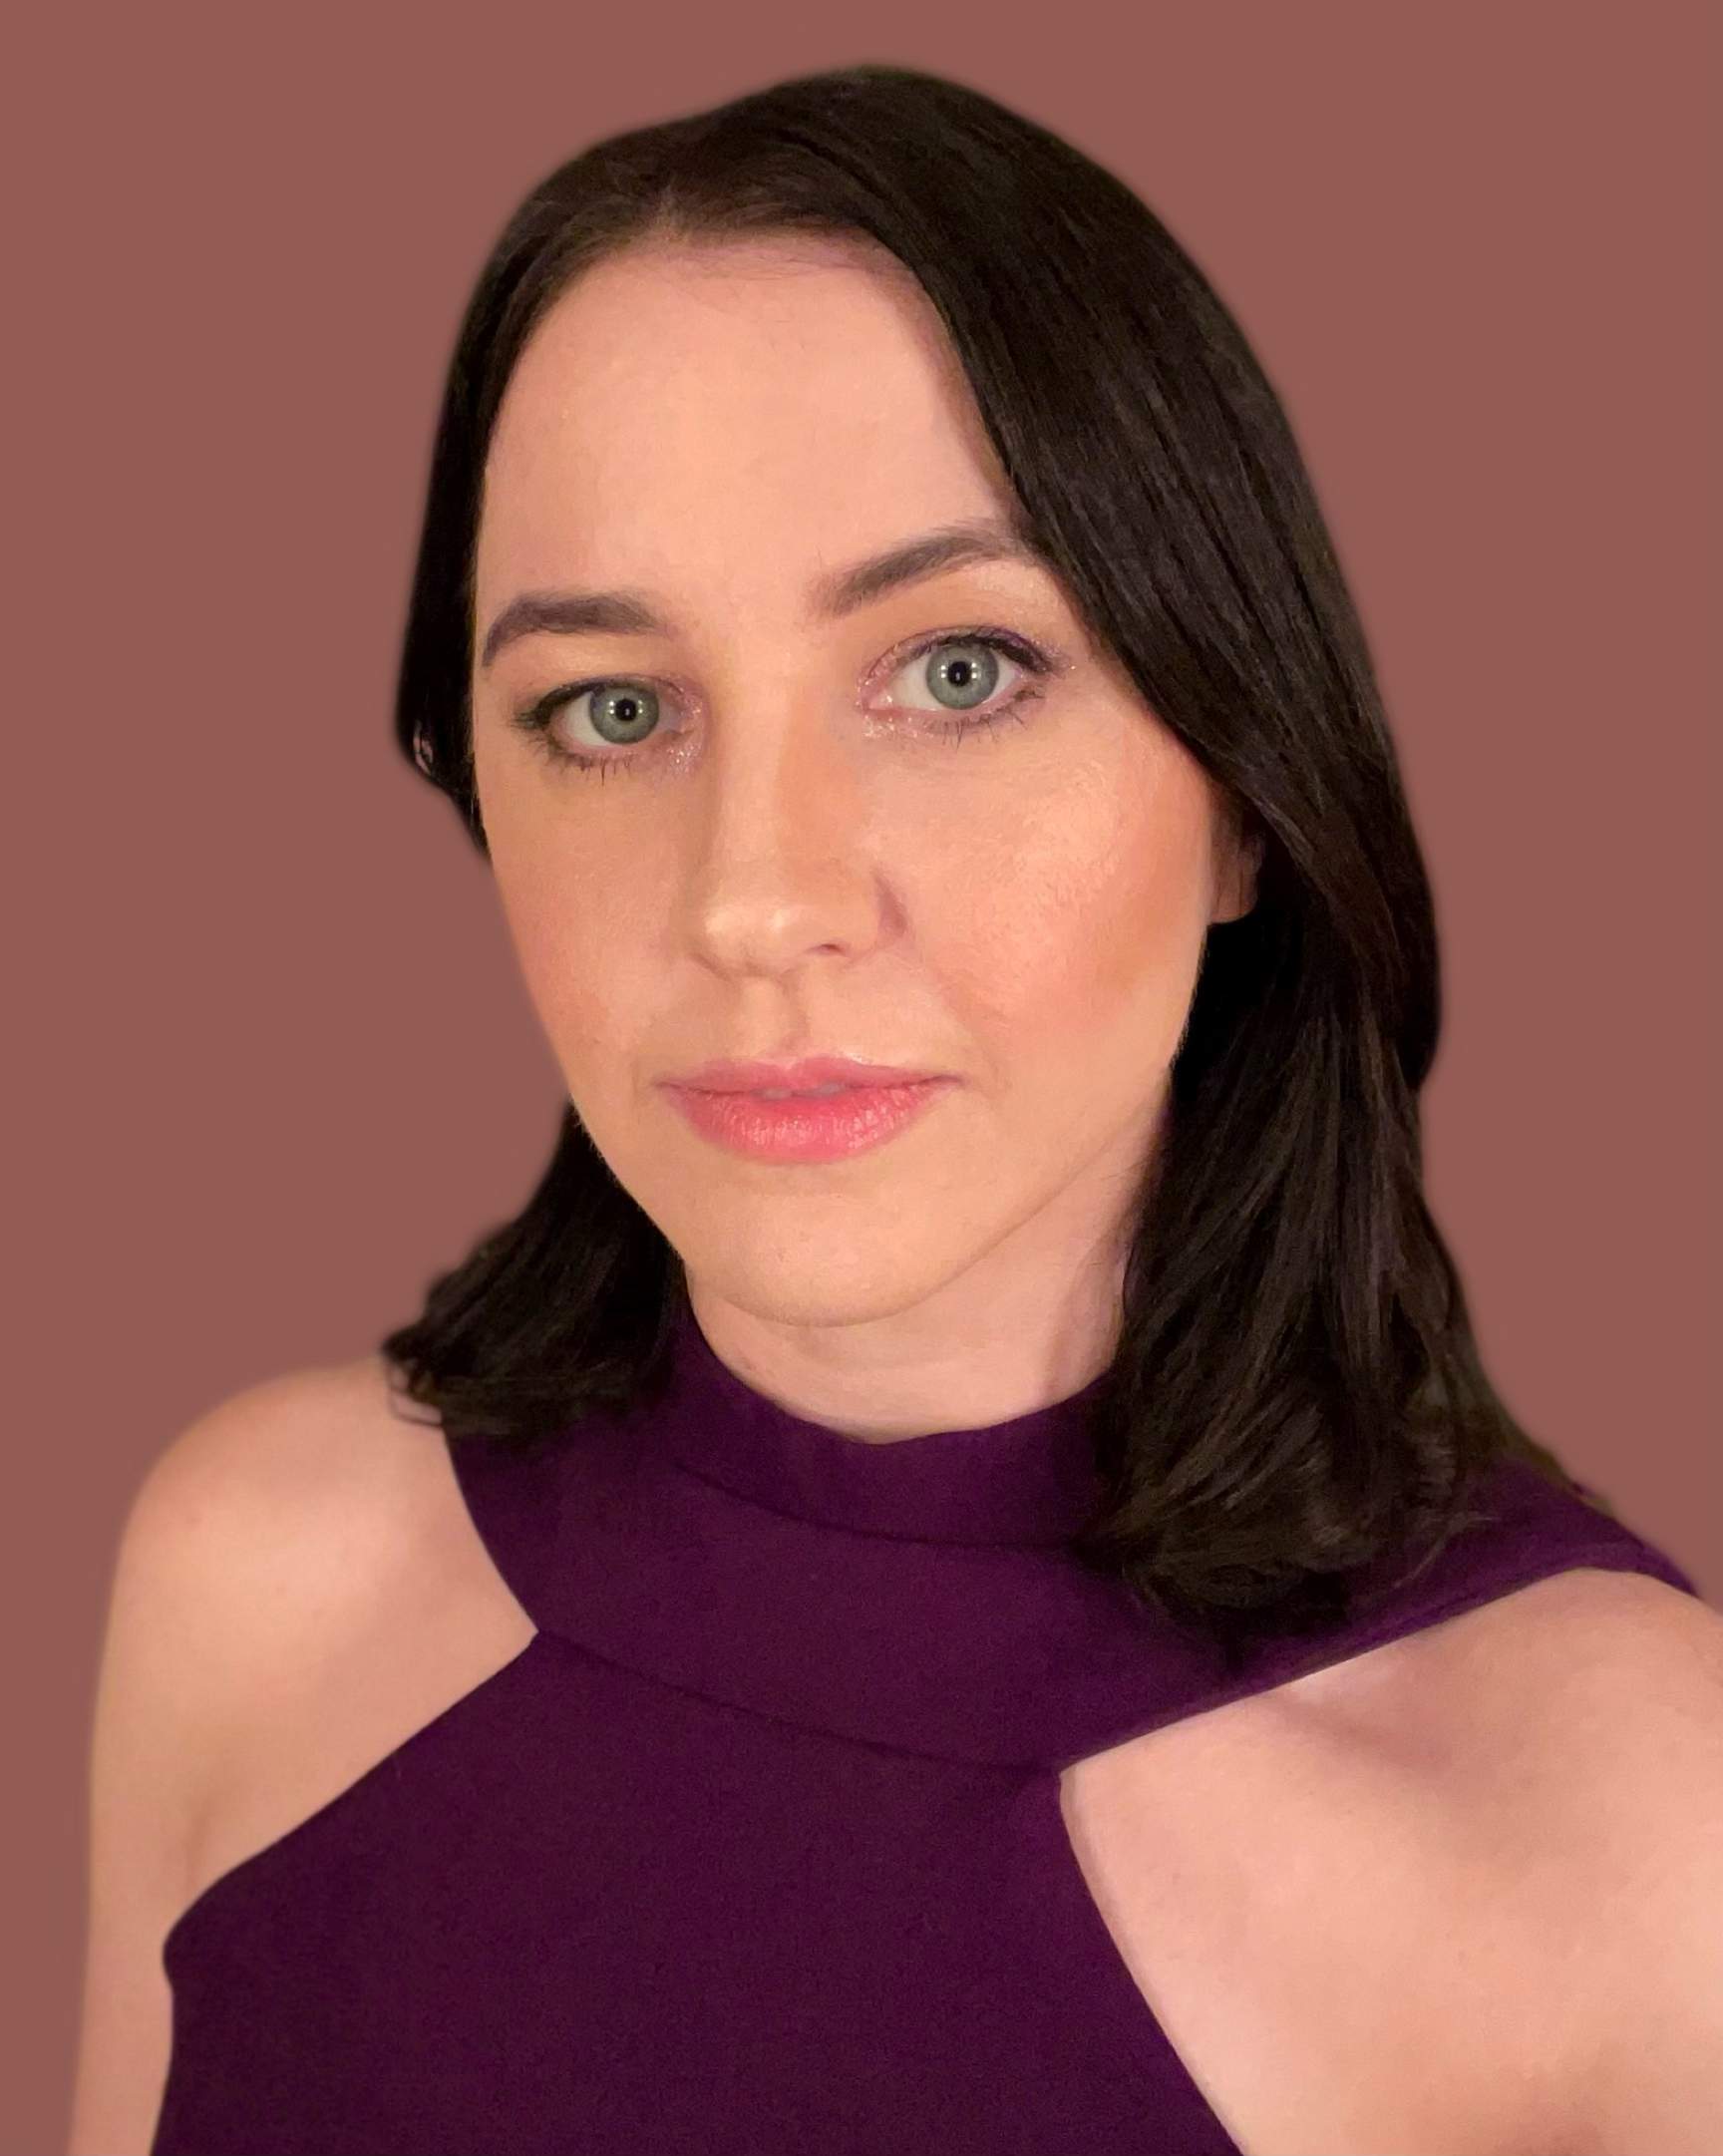 Sarah Colby's headshot. She has long, dark brown hair, bright red lips, pale white skin, and bright blue eyes that stare intensely into your soul.